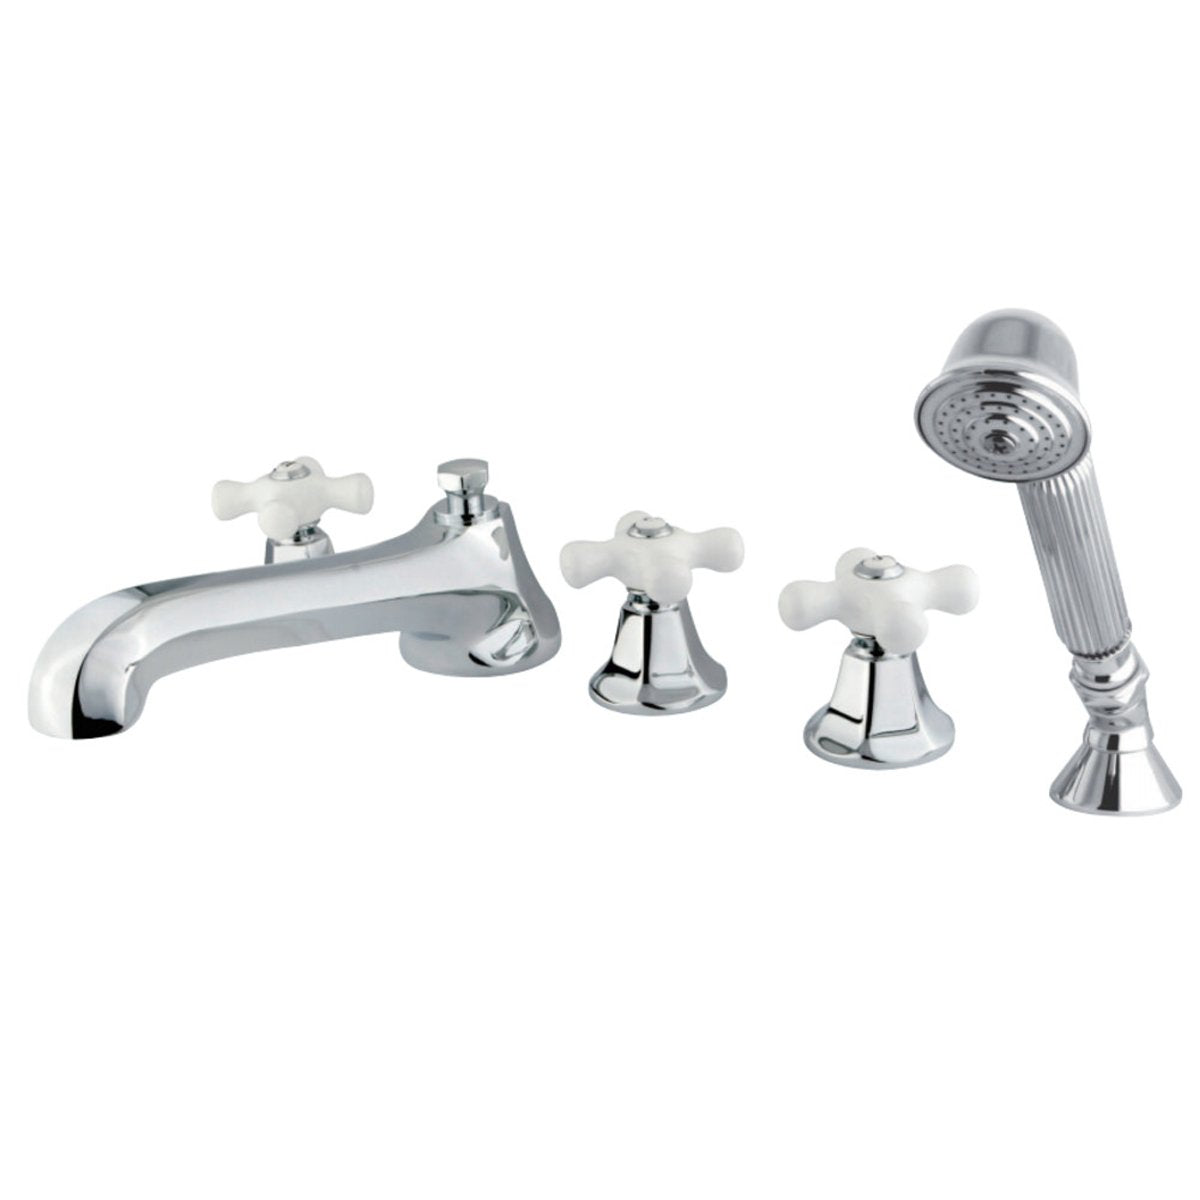 Kingston Brass 5-Hole Roman Tub Filler with Hand Shower